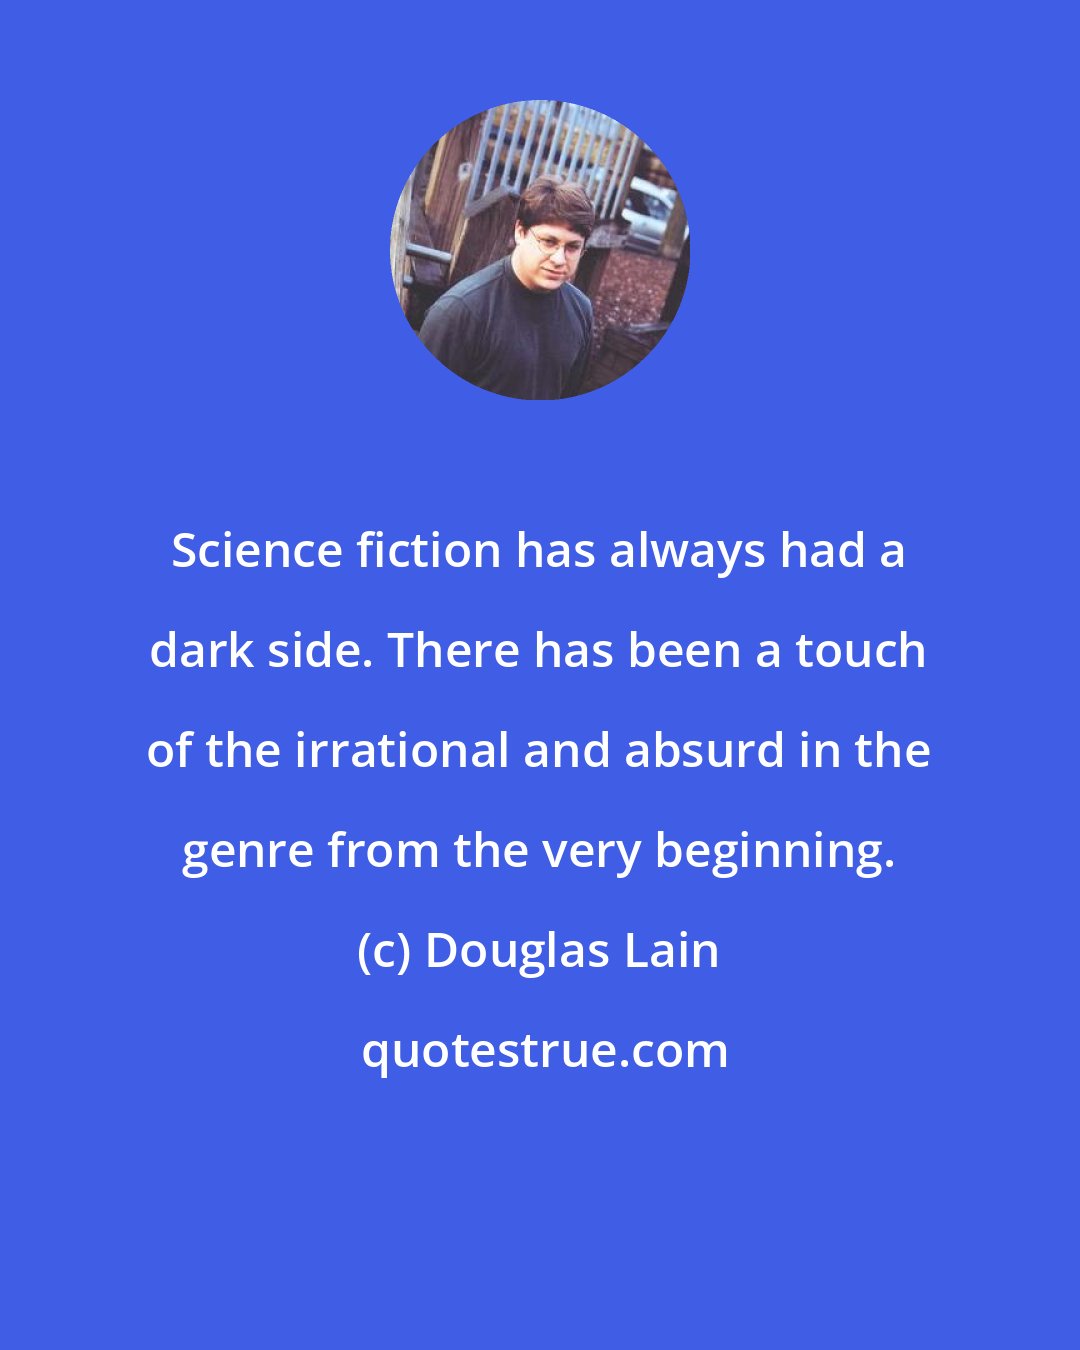 Douglas Lain: Science fiction has always had a dark side. There has been a touch of the irrational and absurd in the genre from the very beginning.